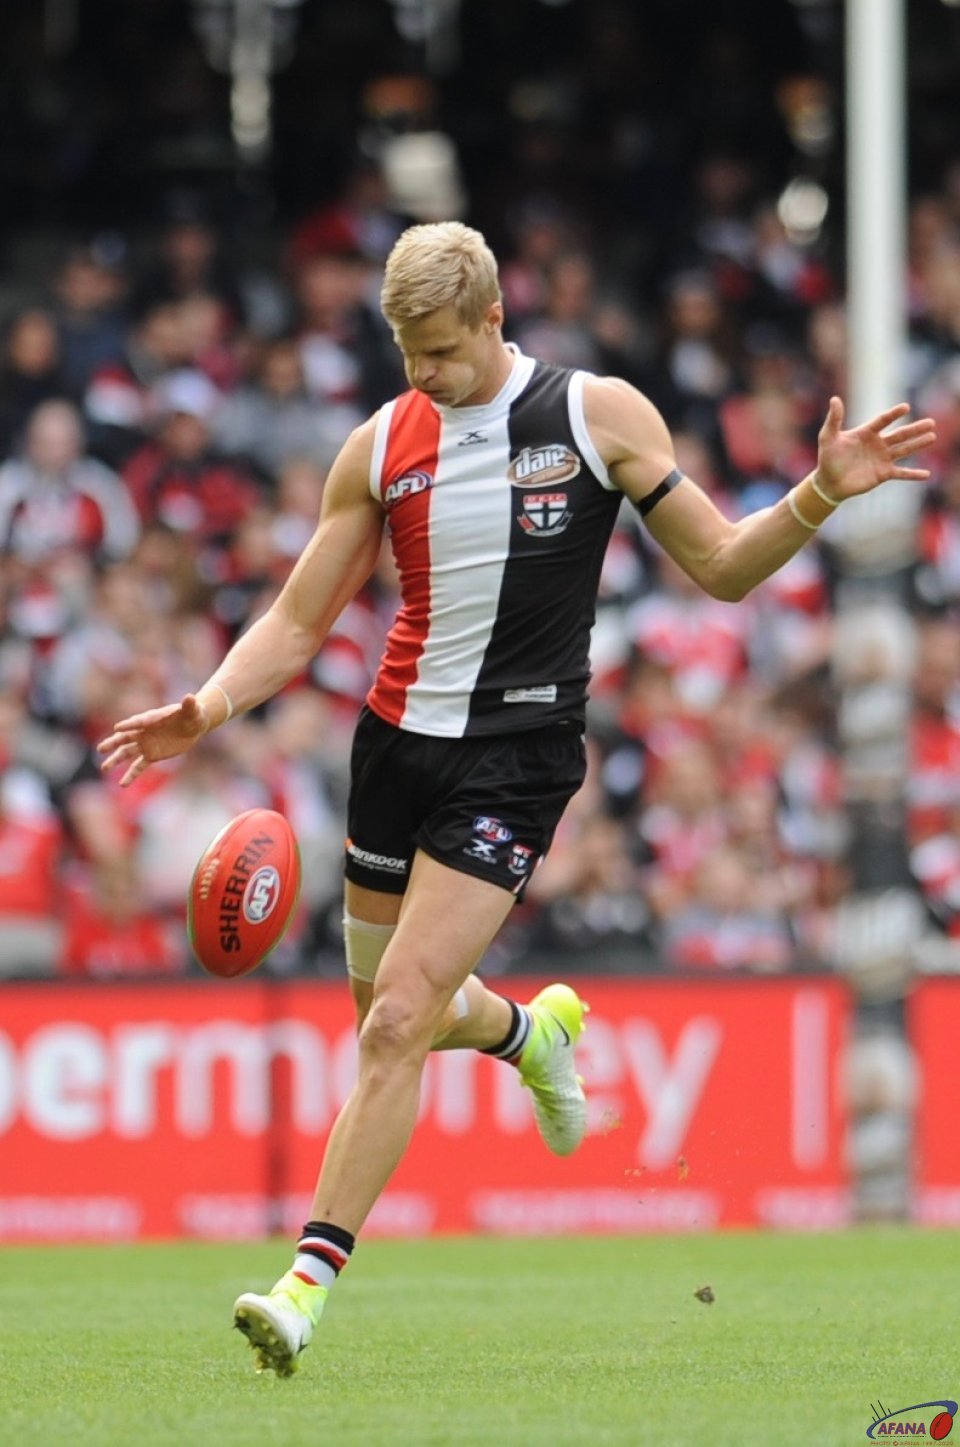 Nick Reiwoldt centres the ball